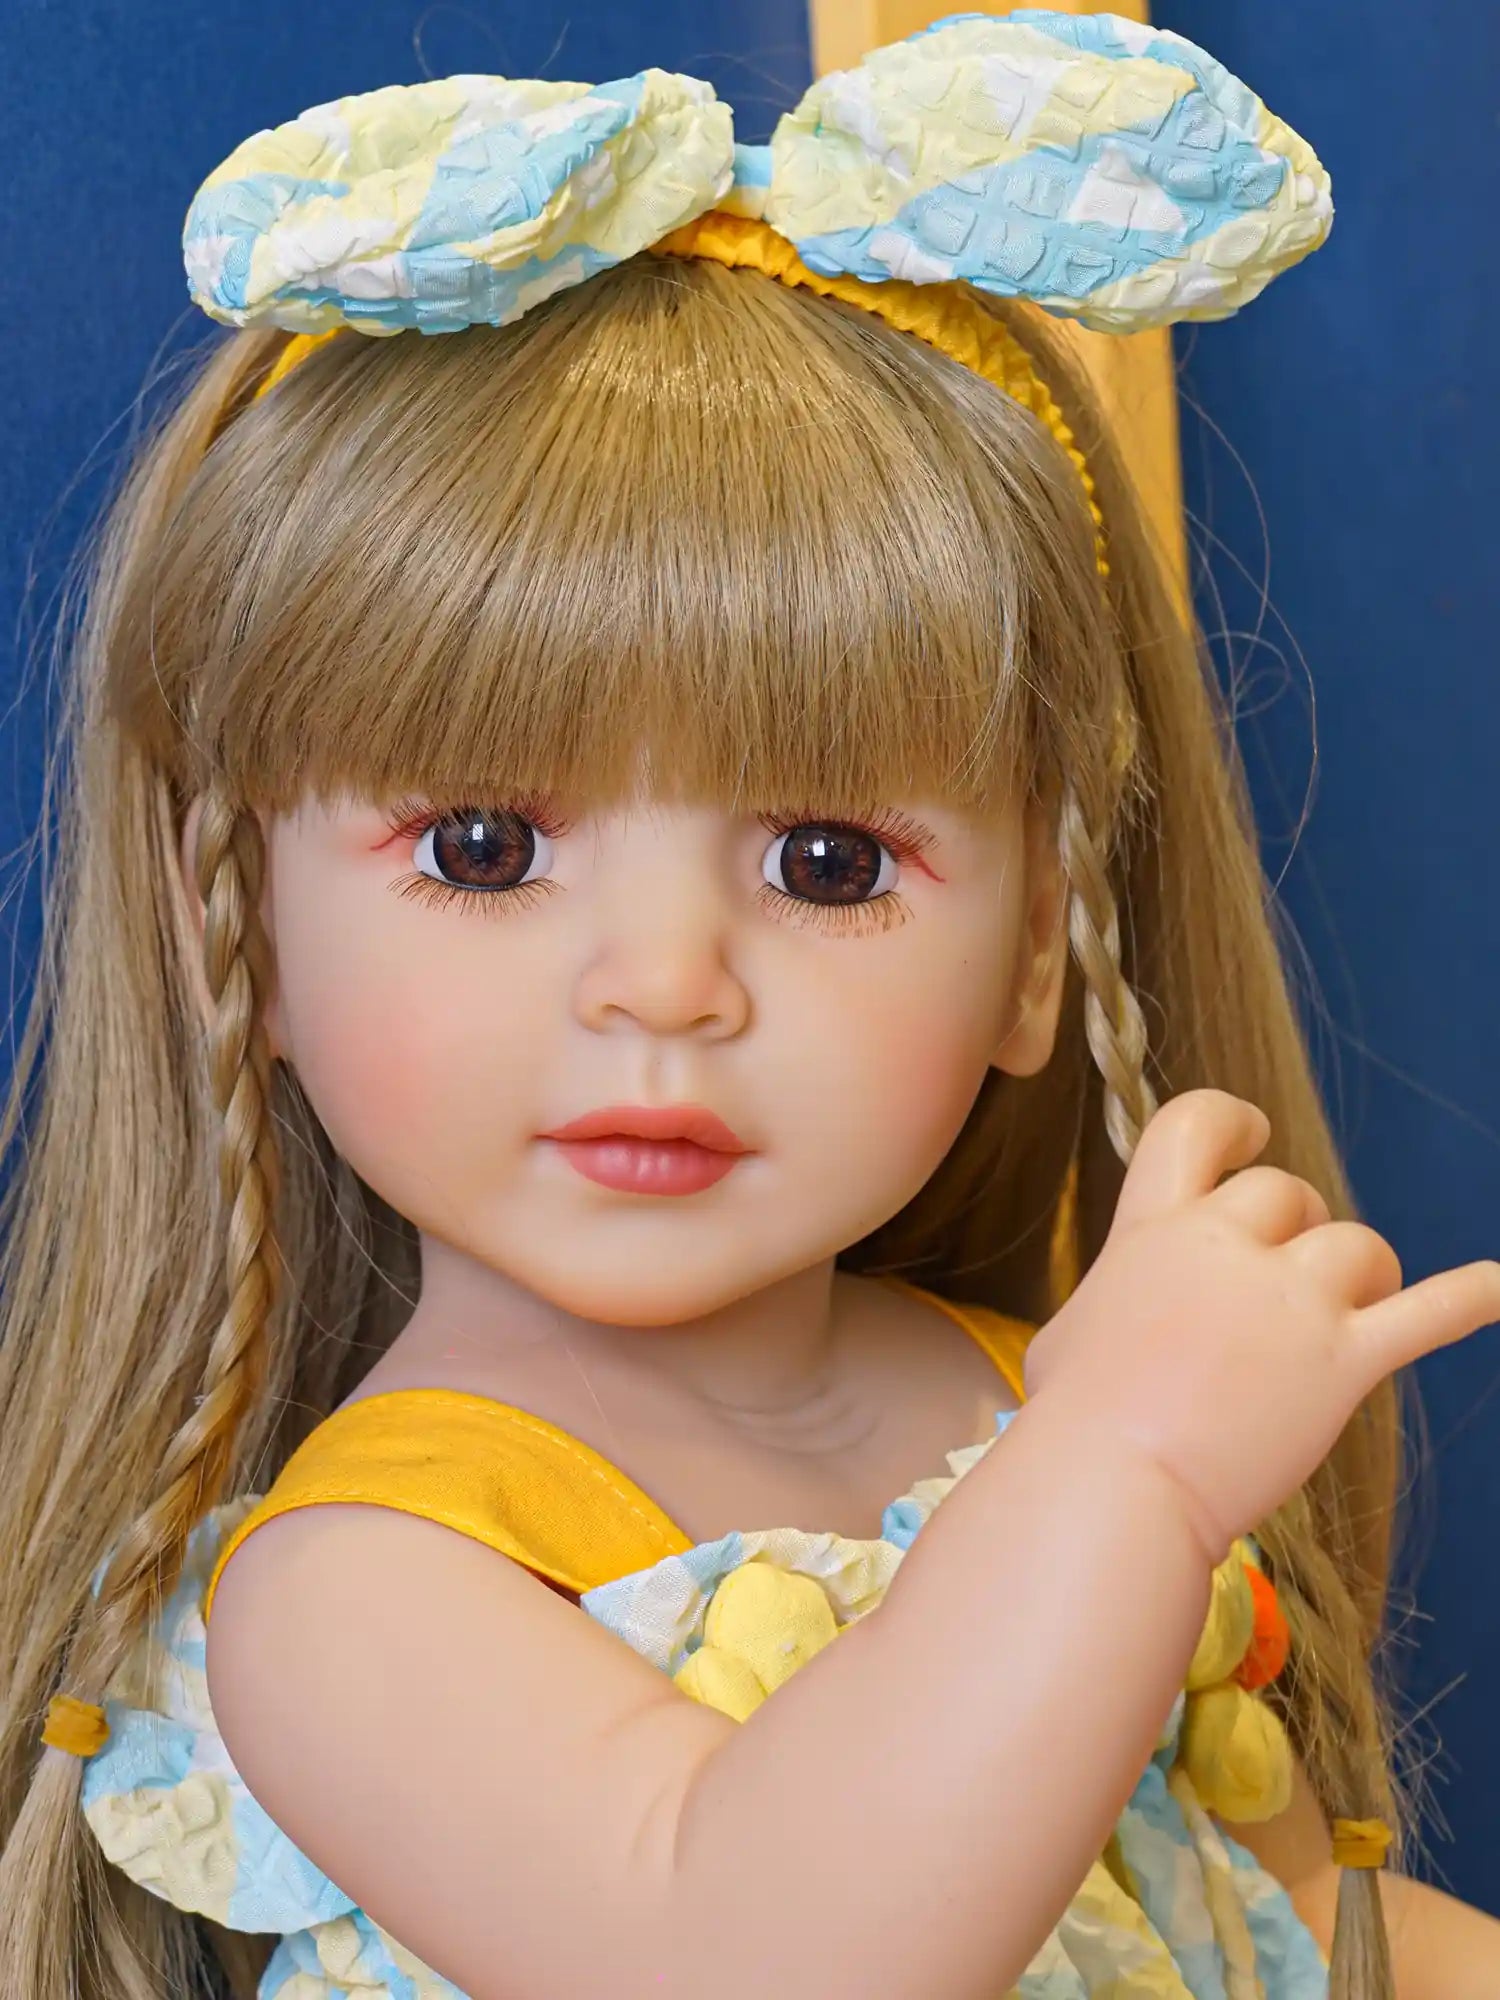 Blonde-haired doll with blue eyes in a pastel blue sundress, sitting comfortably.